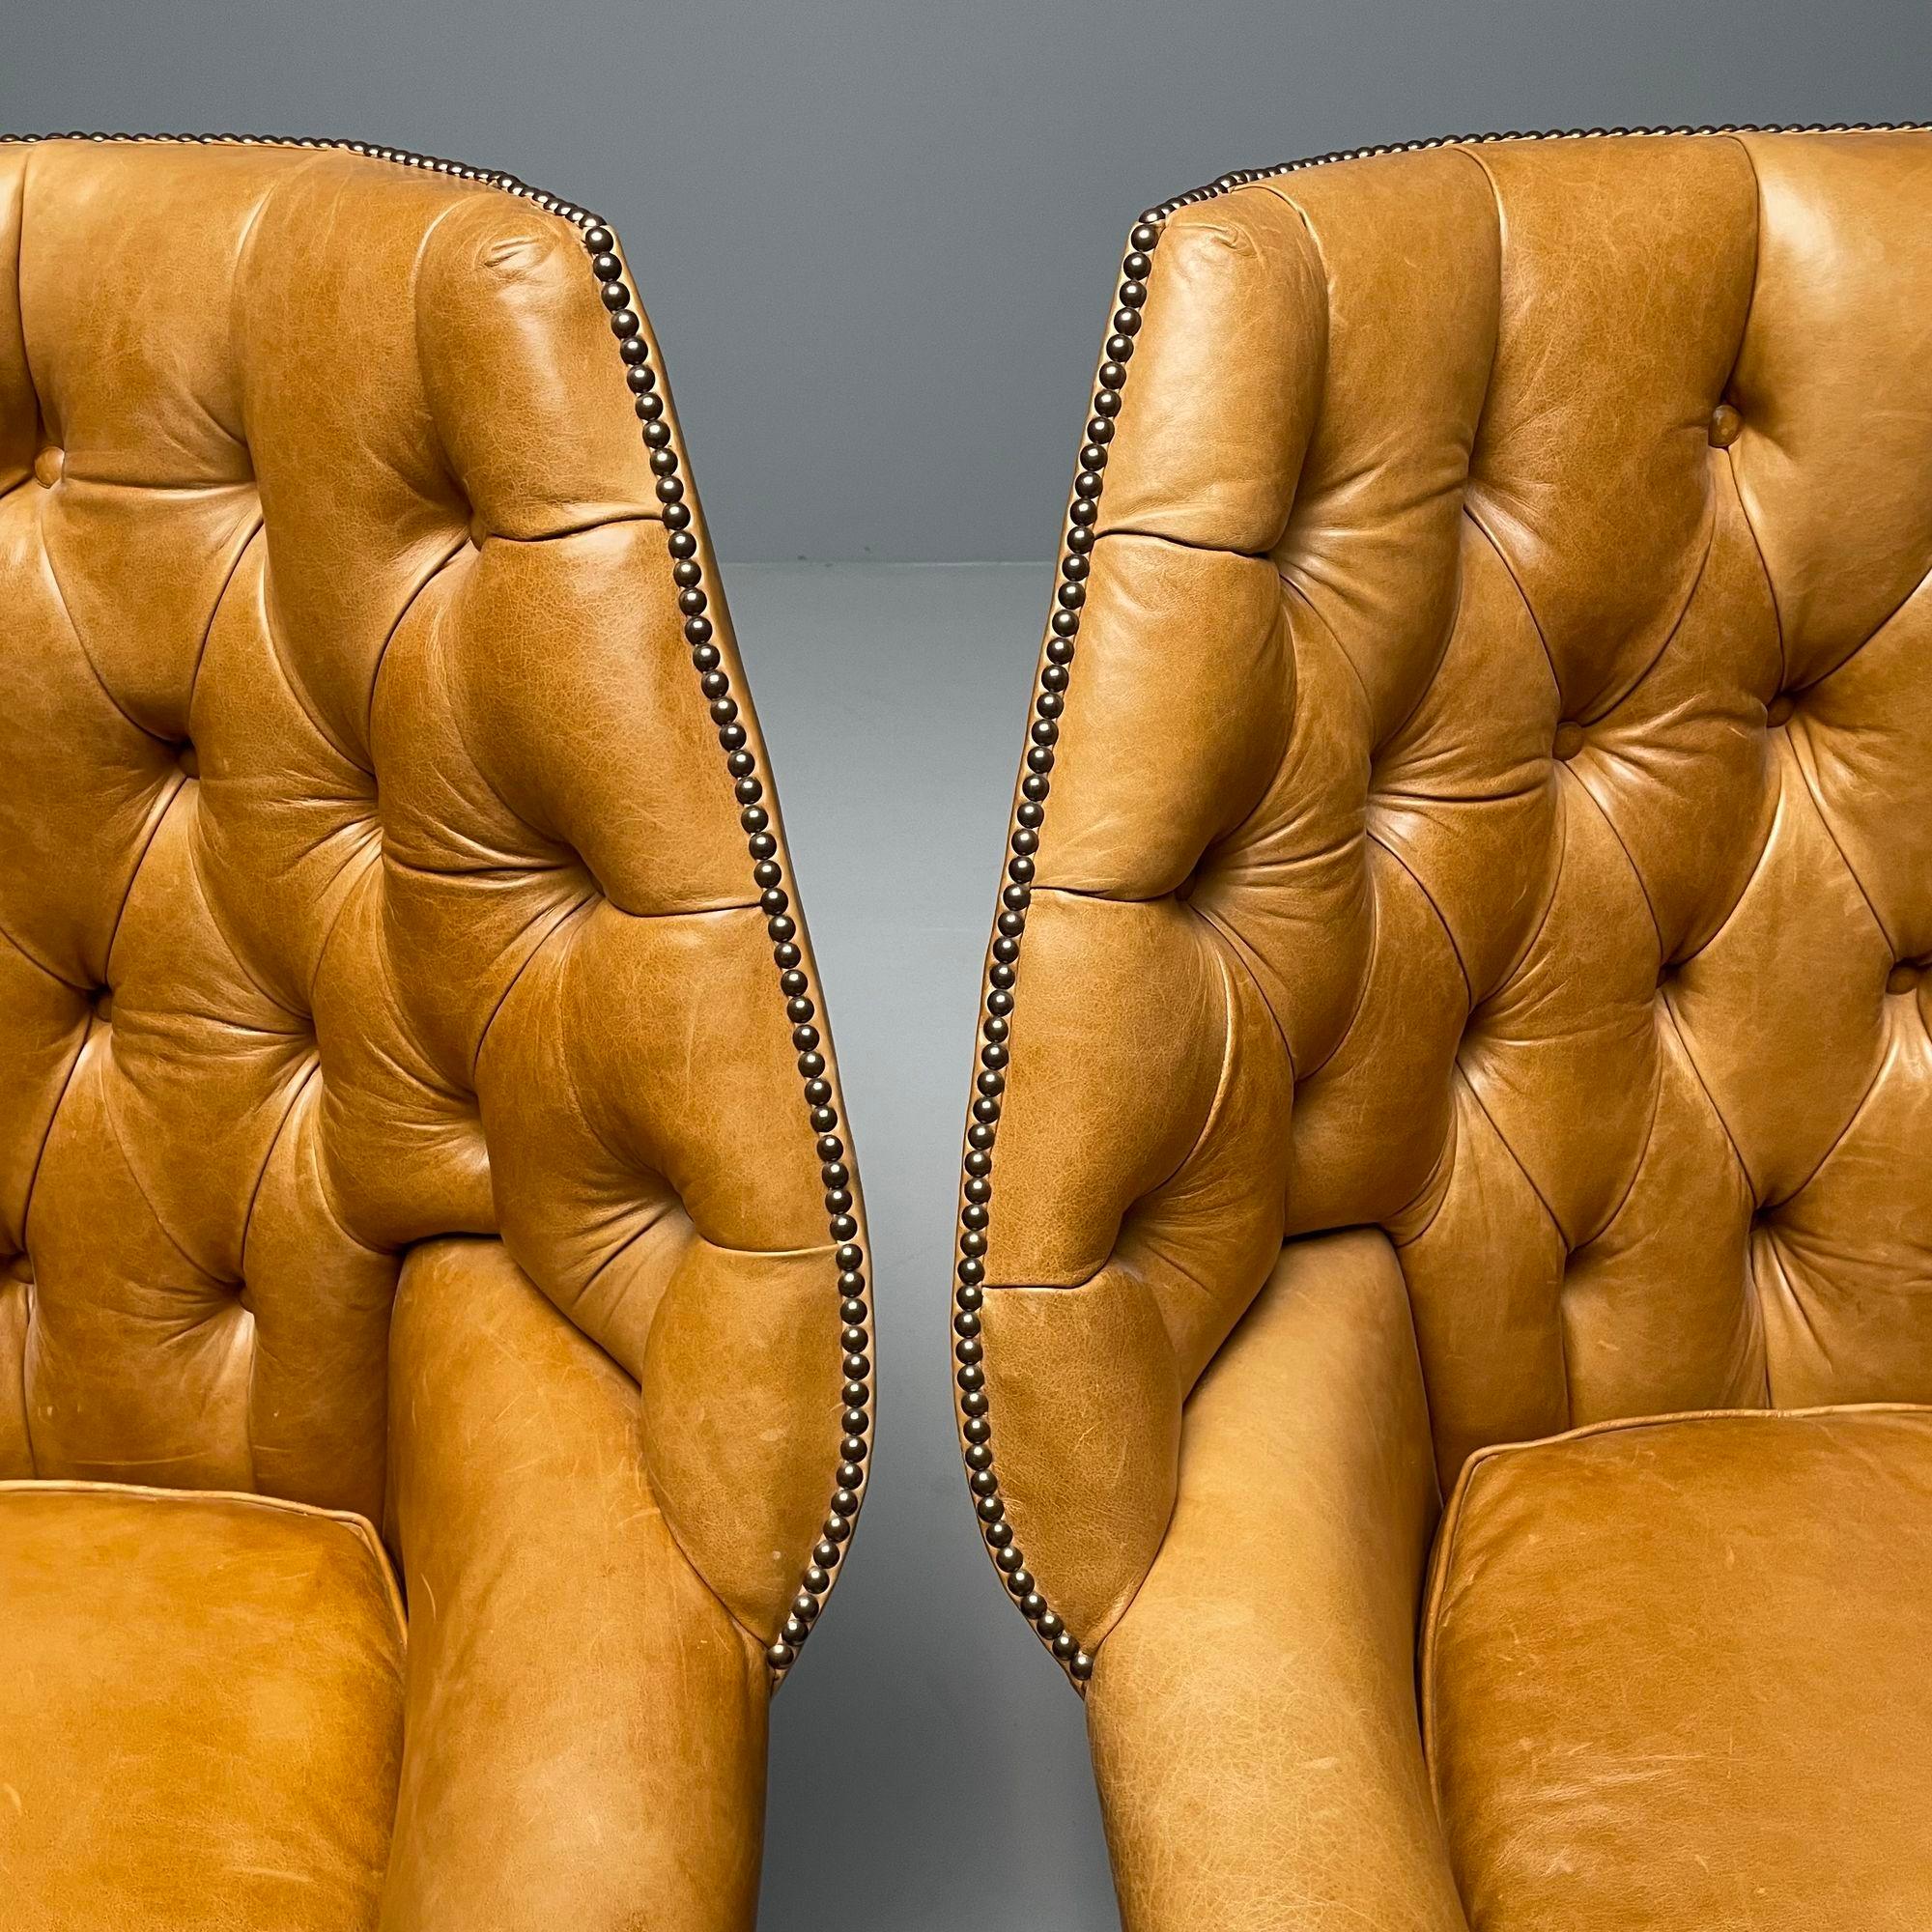 Georgian, Large Tufted Lounge Chairs and Ottomans, Tan Leather, USA, 2000s For Sale 1